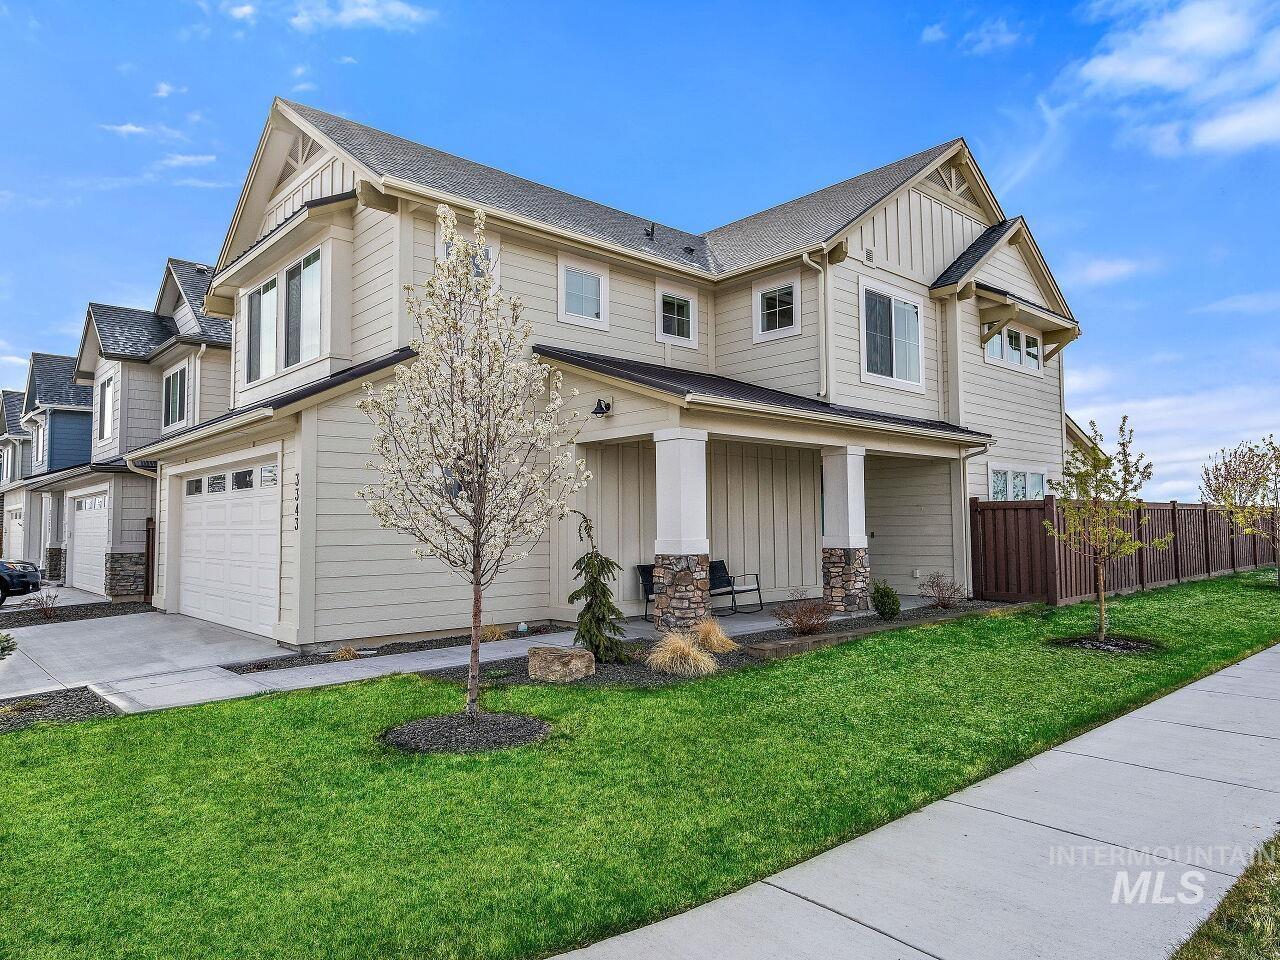 **OPEN HOUSE Sat 5/21 11a-1p.** WELCOME HOME to this immaculate 1-year-old Brighton home in the highly desirable neighborhood of Bainbridge! Designer gourmet kitchen with breakfast bar island opens to a naturally illuminated dining area and family room. Retreat to your Master Suite with gorgeous views of the mountains. Roomy bedrooms along with a spacious den/office/flex room give many options for your little people and guests. Most convenient Laundry Room is on the upper floor with full built-in cabinetry and folding table. Relax on your south-facing covered patio. Luxury interiors including natural hardwood, Bosch appliances and Kohler features throughout. Energy Star Certified! Community features a park and two pools with ample walking/running paths. Close to Costco, Fred Meyer, Winco and Walmart as well as a plethora of restaurants and entertainment. - Meghan Saboori, Main: 208-407-0675, Boise Premier Real Estate, Main: 888-506-2234,